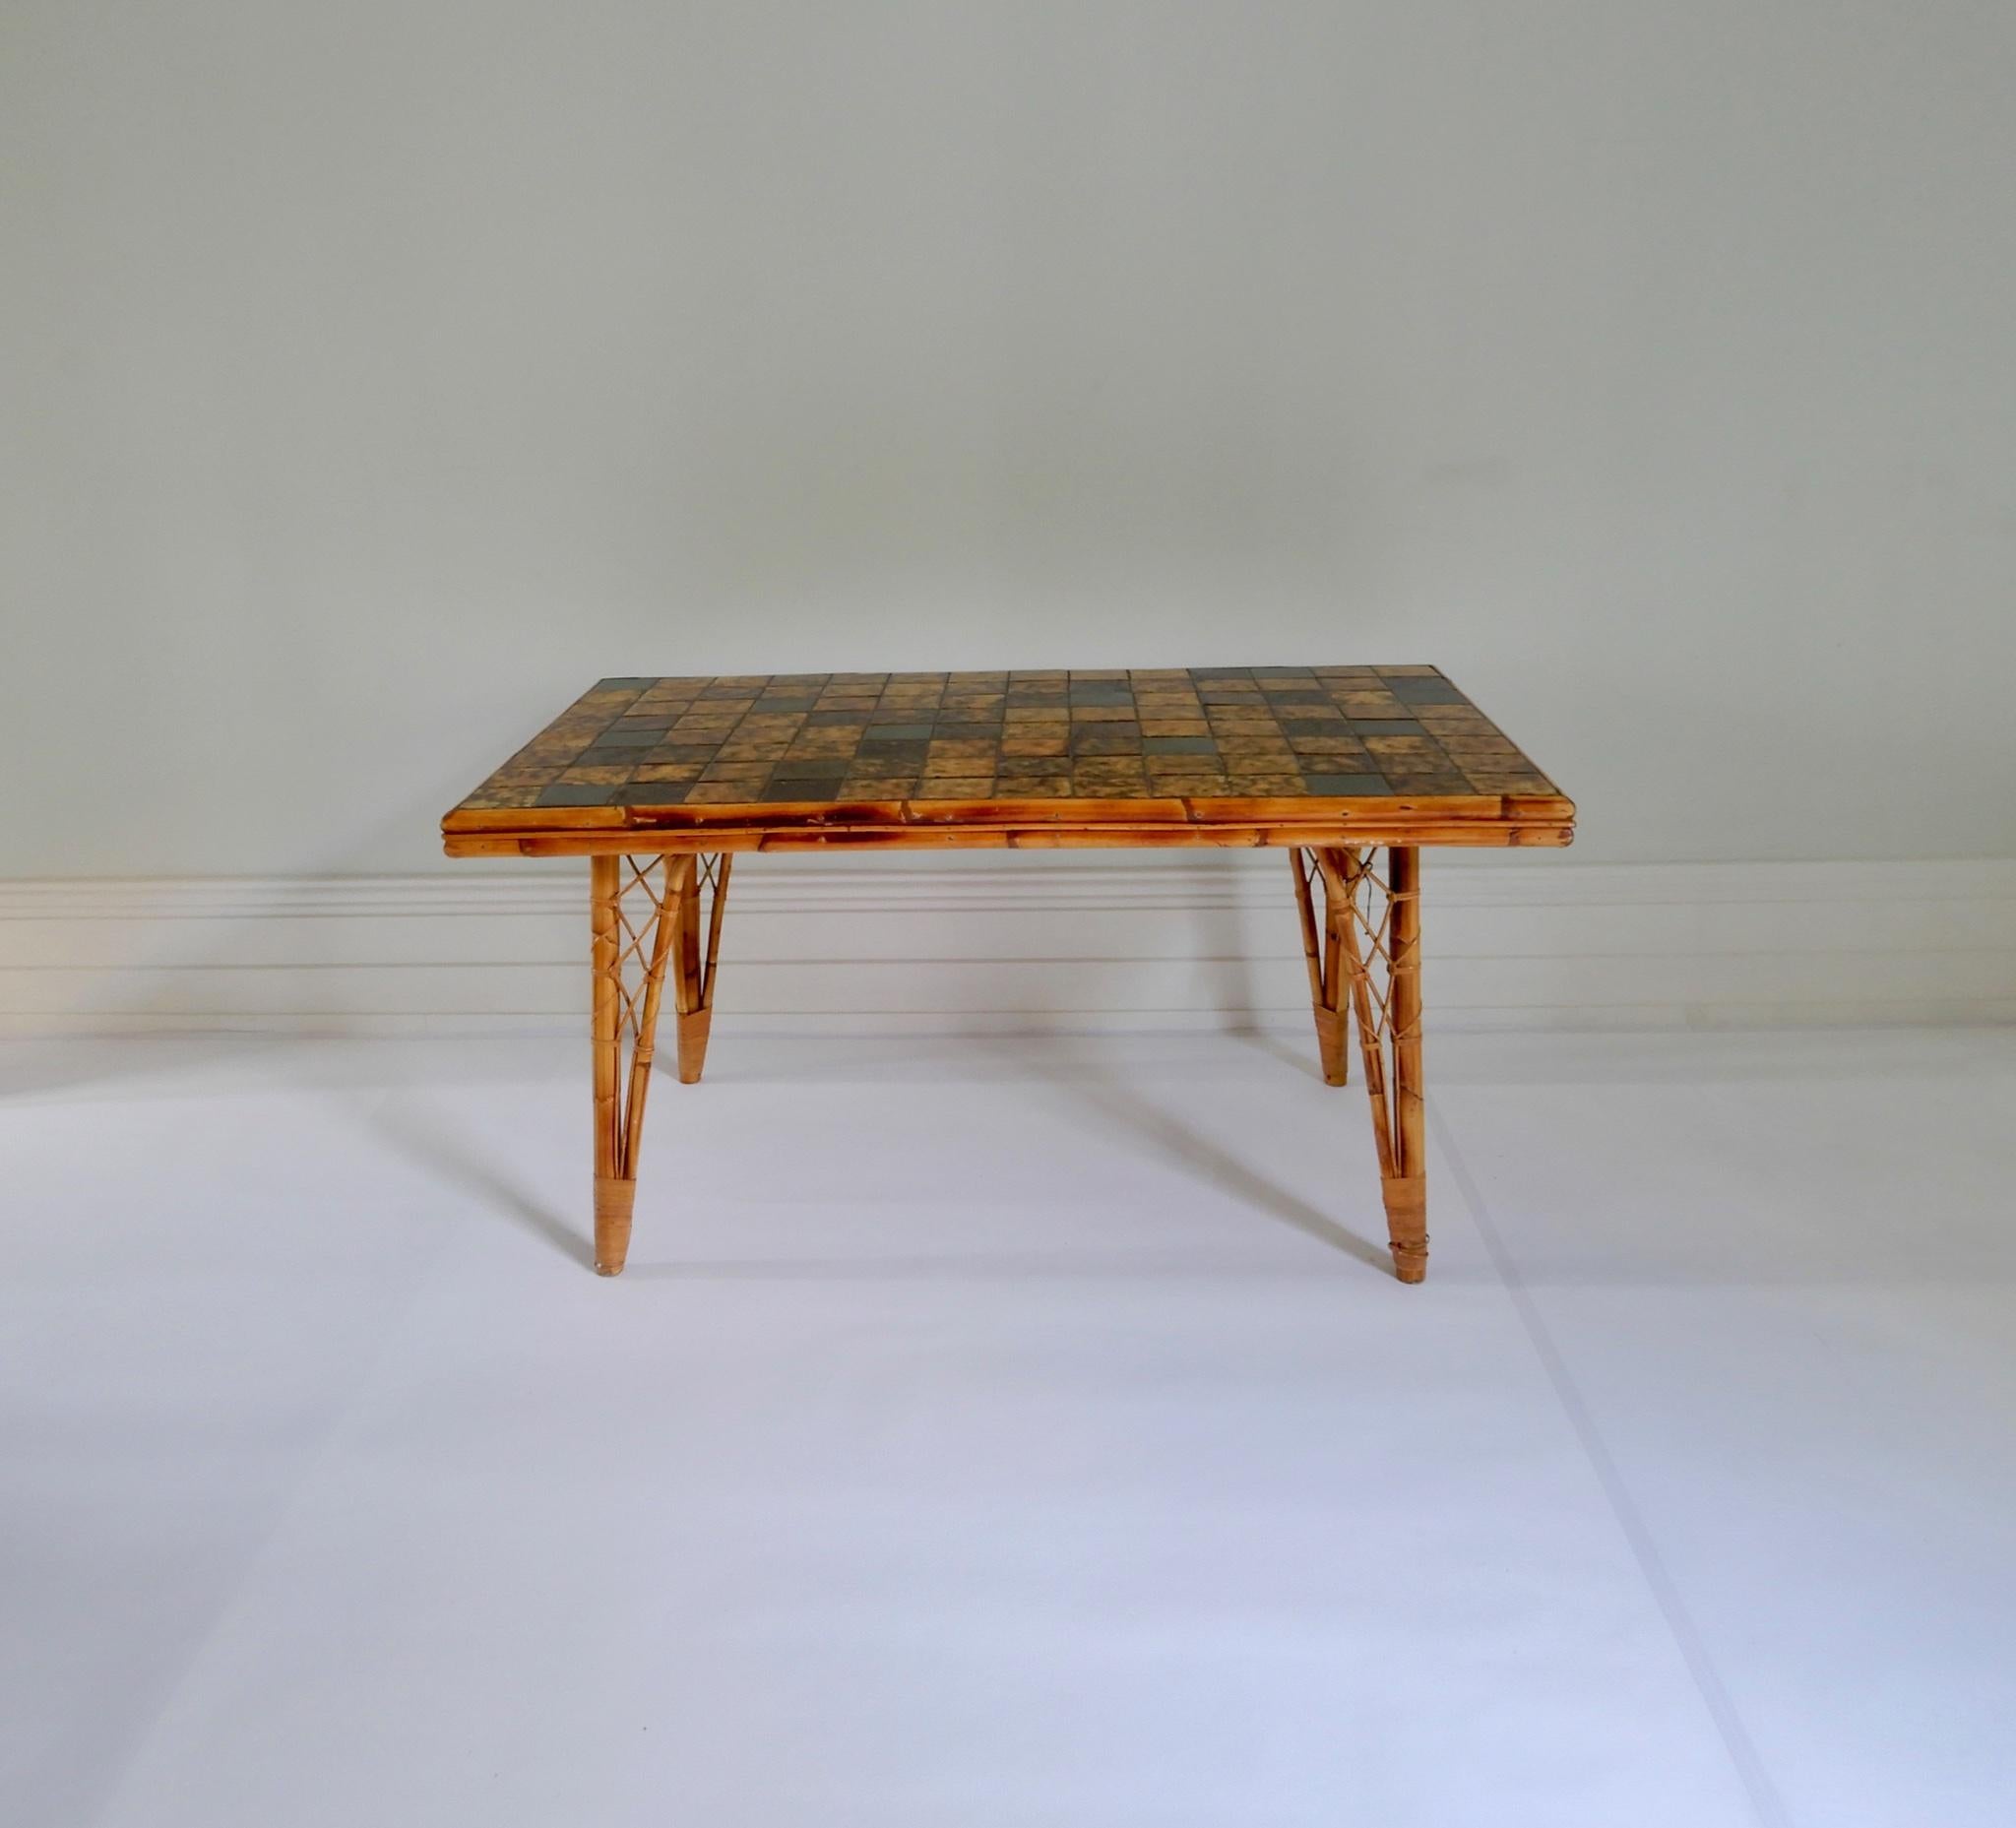 Mid-Century Modern French Bamboo Dining Table with Ceramic Tile Top, 1950s For Sale